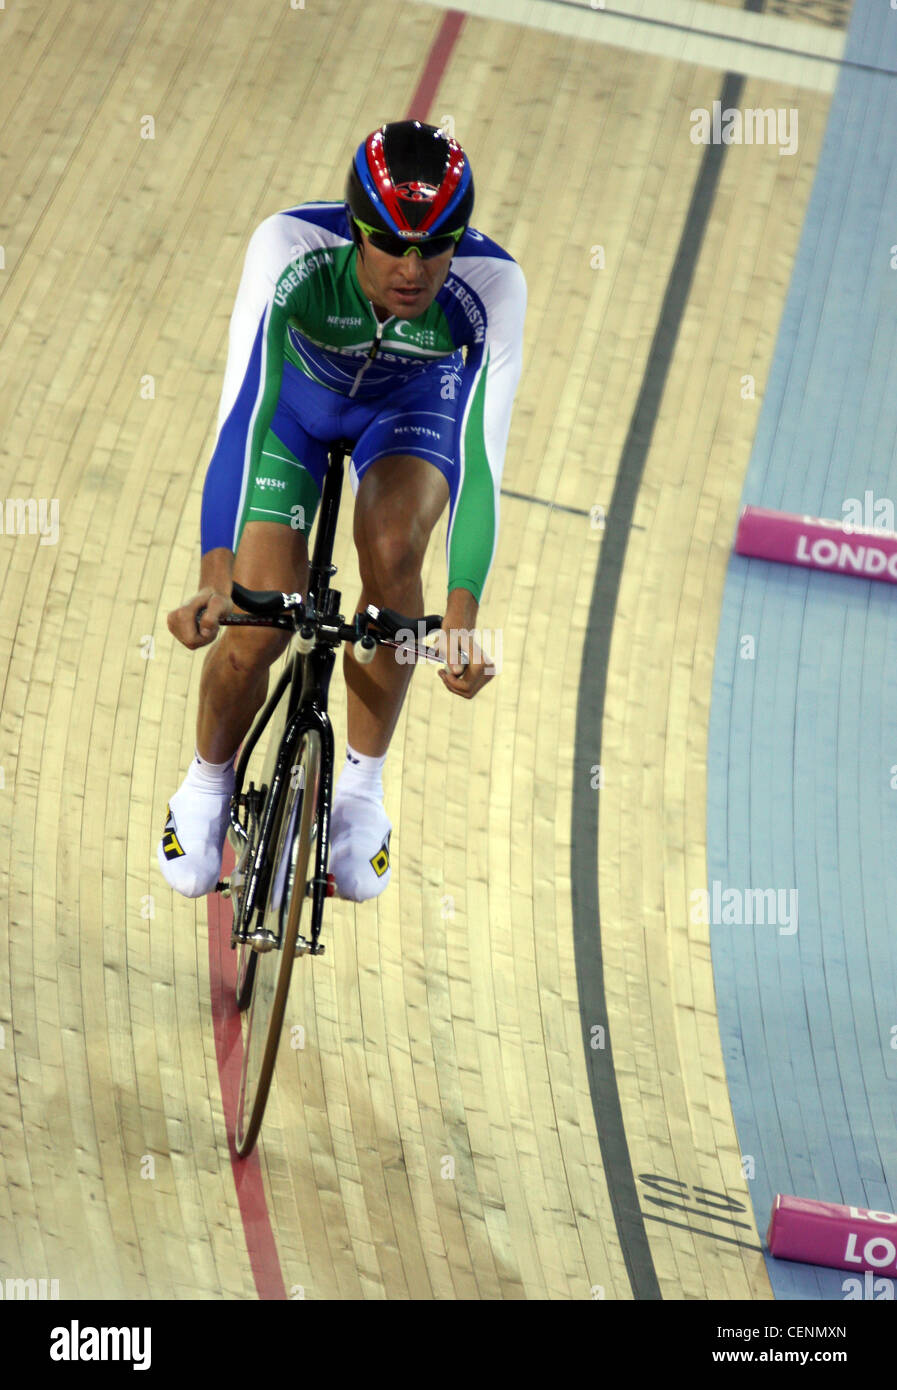 Vladimir TUYCHIEV (UZB) in the Men's Omnium Qualifying Heat 2 at the UCI Track Cycling World Cup Velodrome. Stock Photo